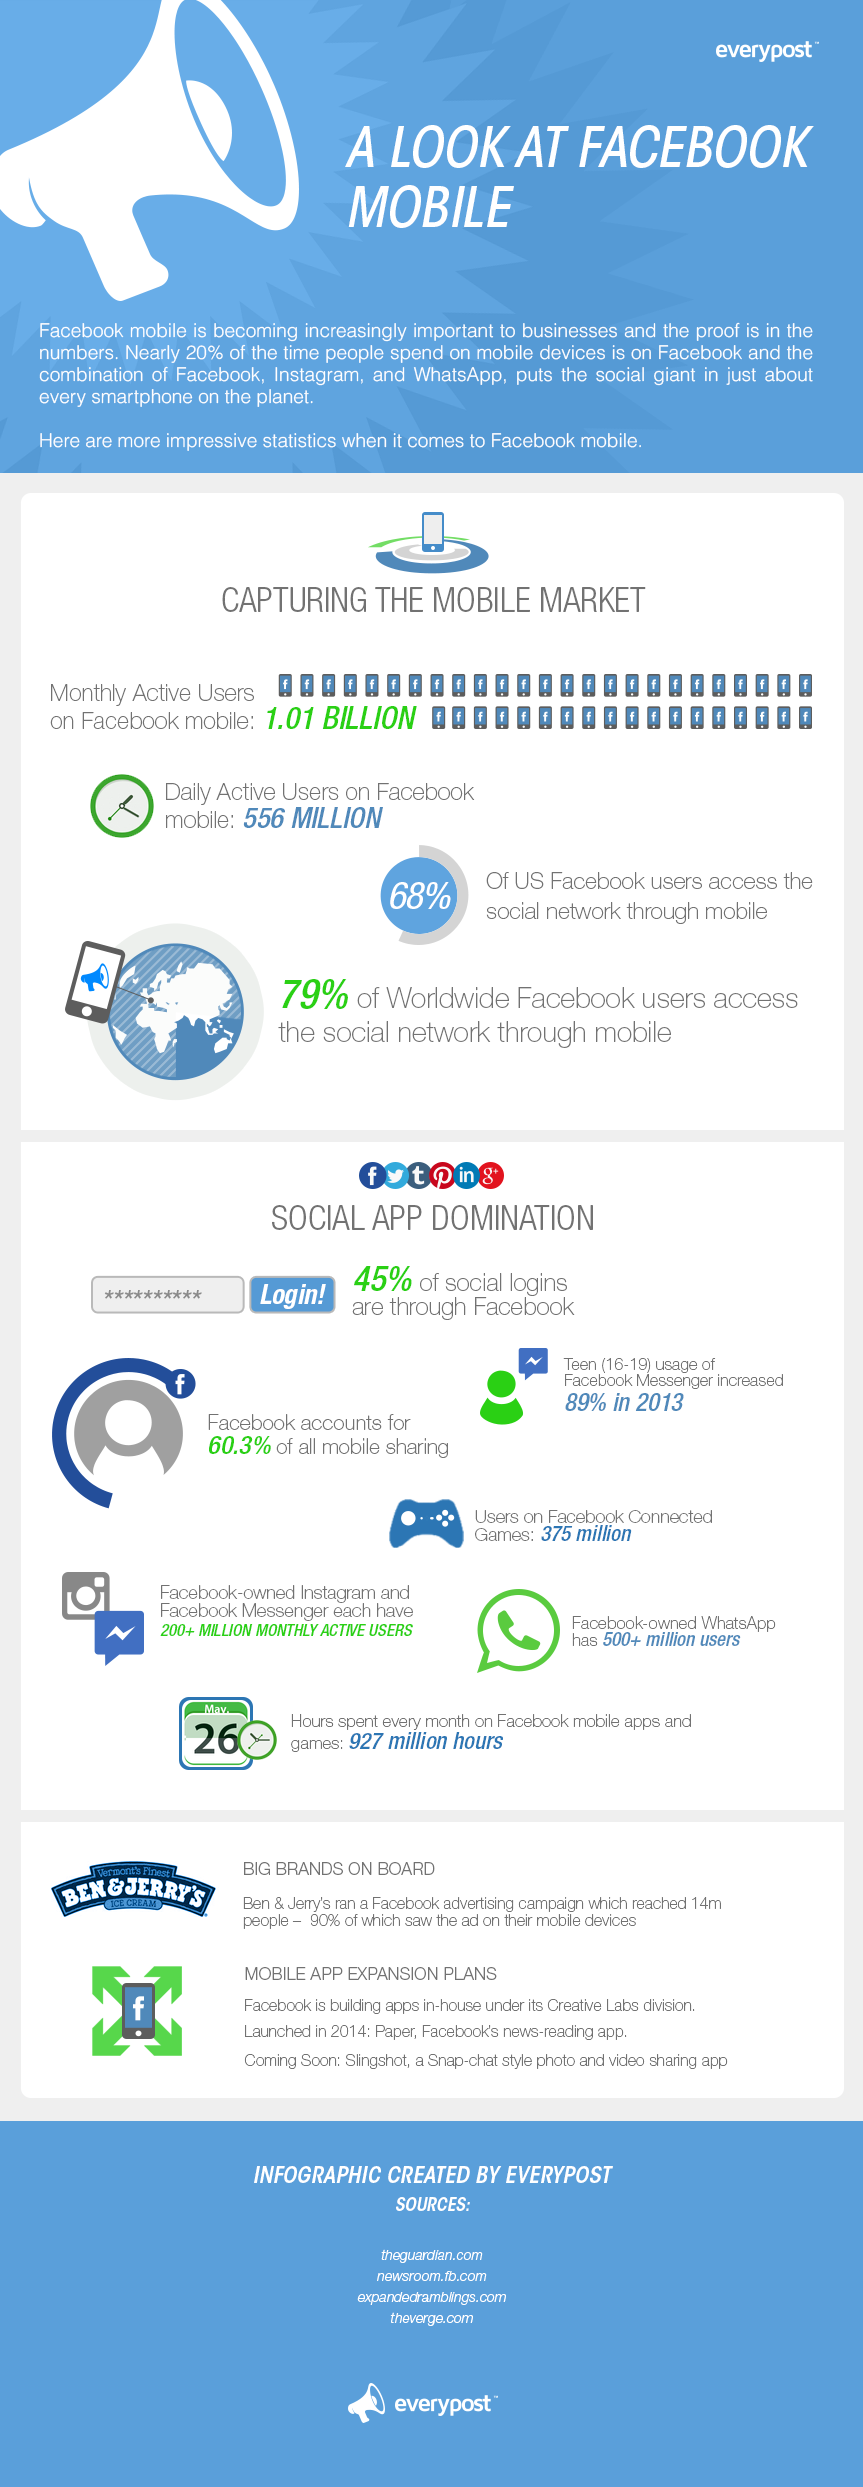 Facebook Mobile and App Trends in 2014 - #infographic #socialmedia